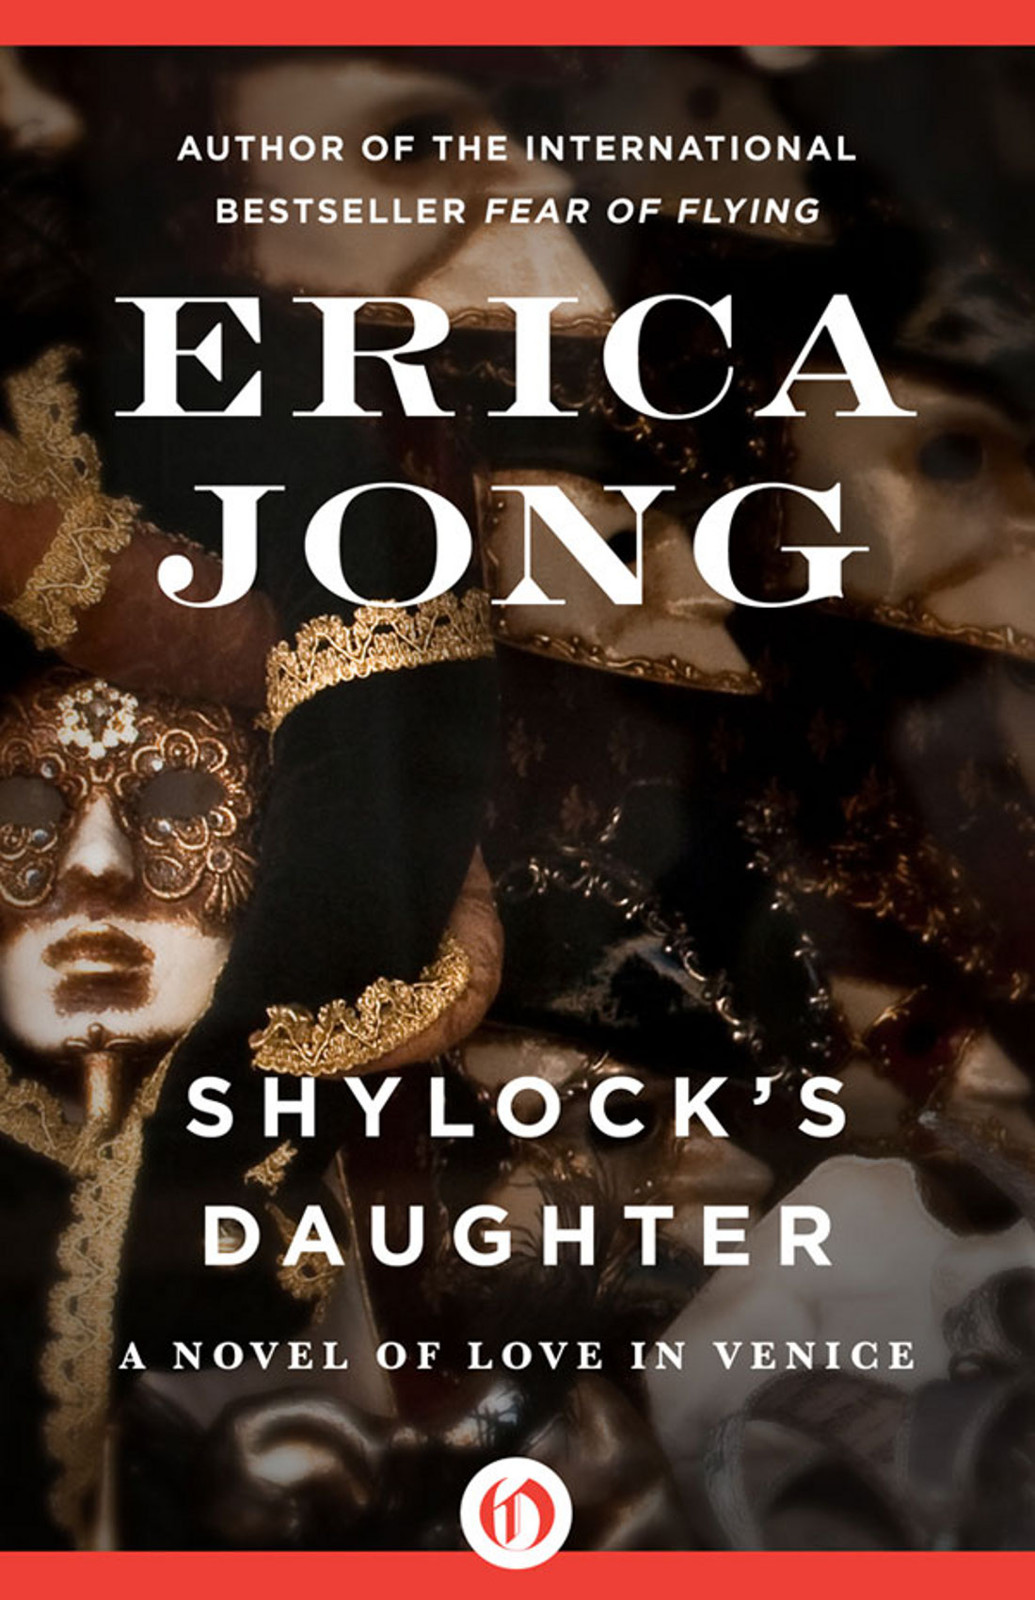 Shylock's Daughter: A Novel of Love in Venice by Erica Jong